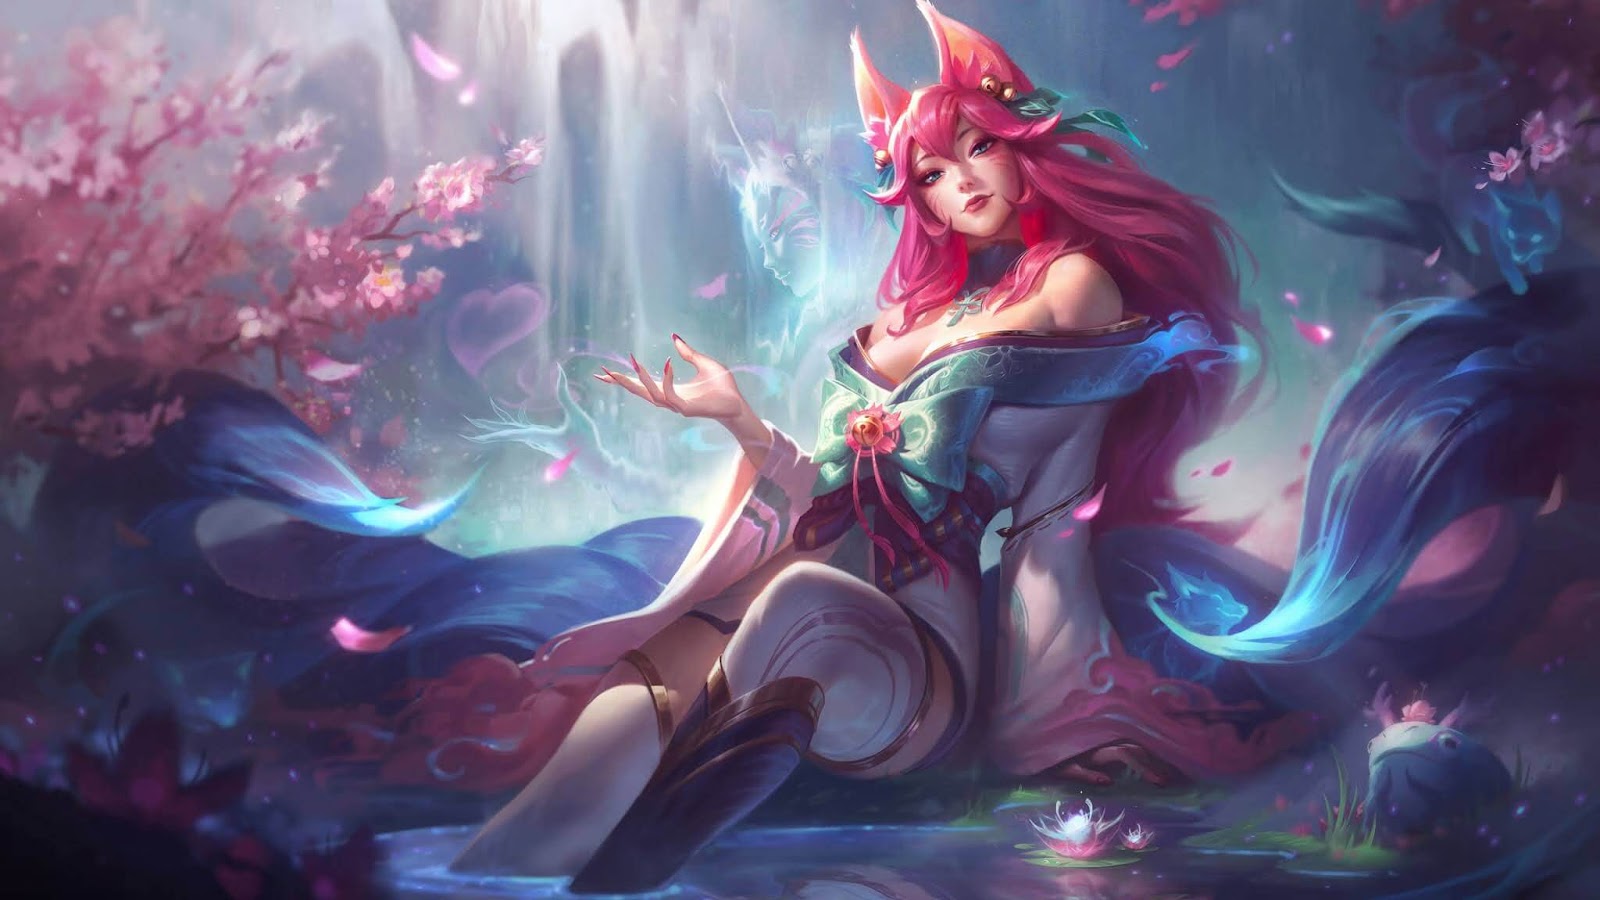 So you want to main ahri